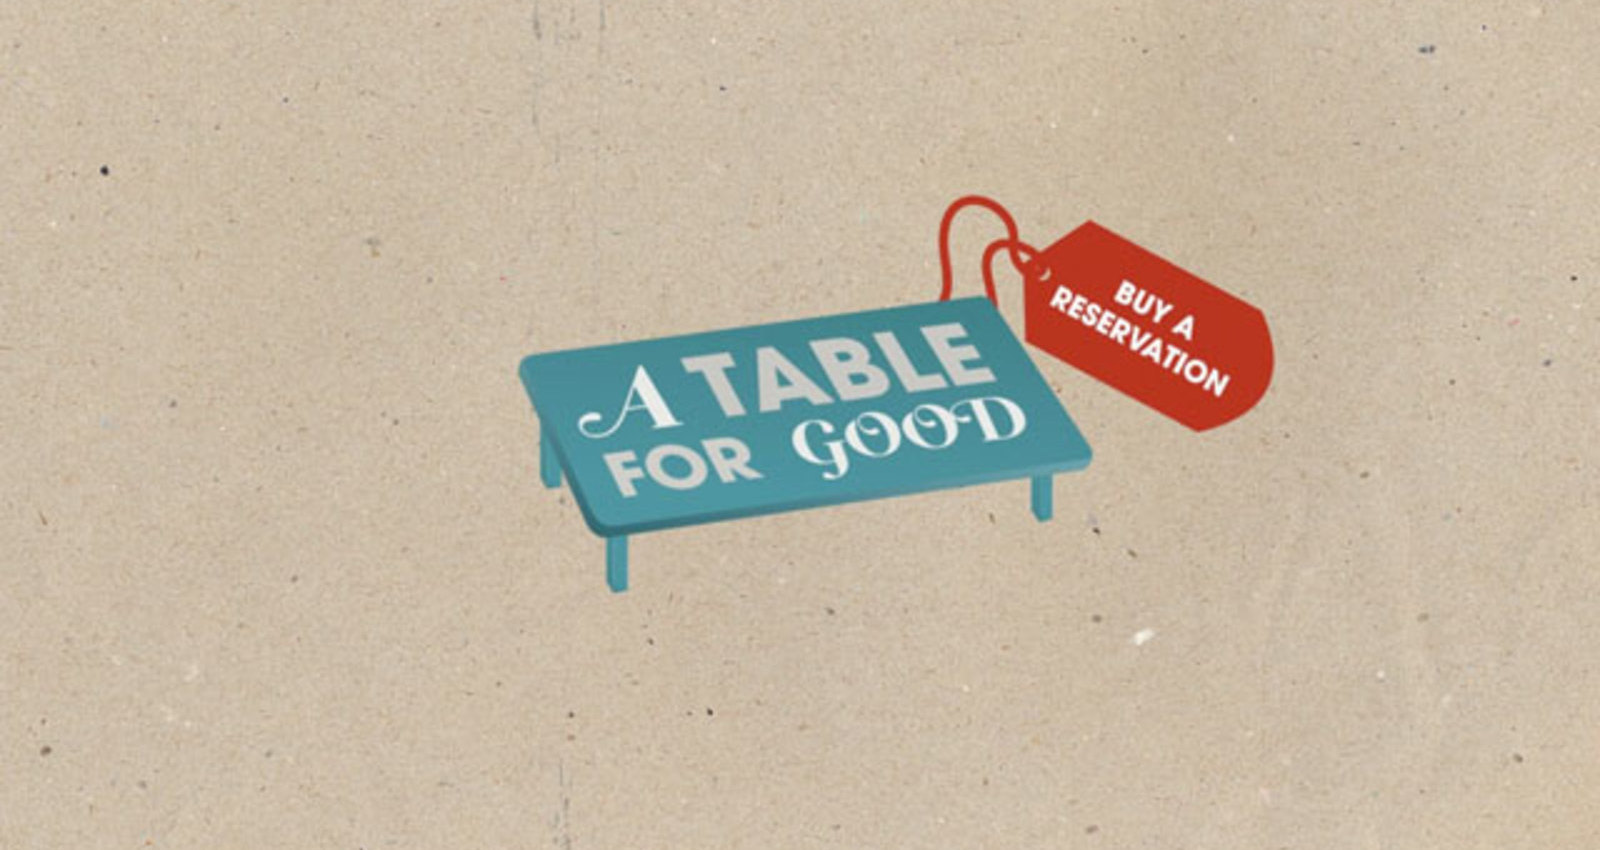 A Table for Good